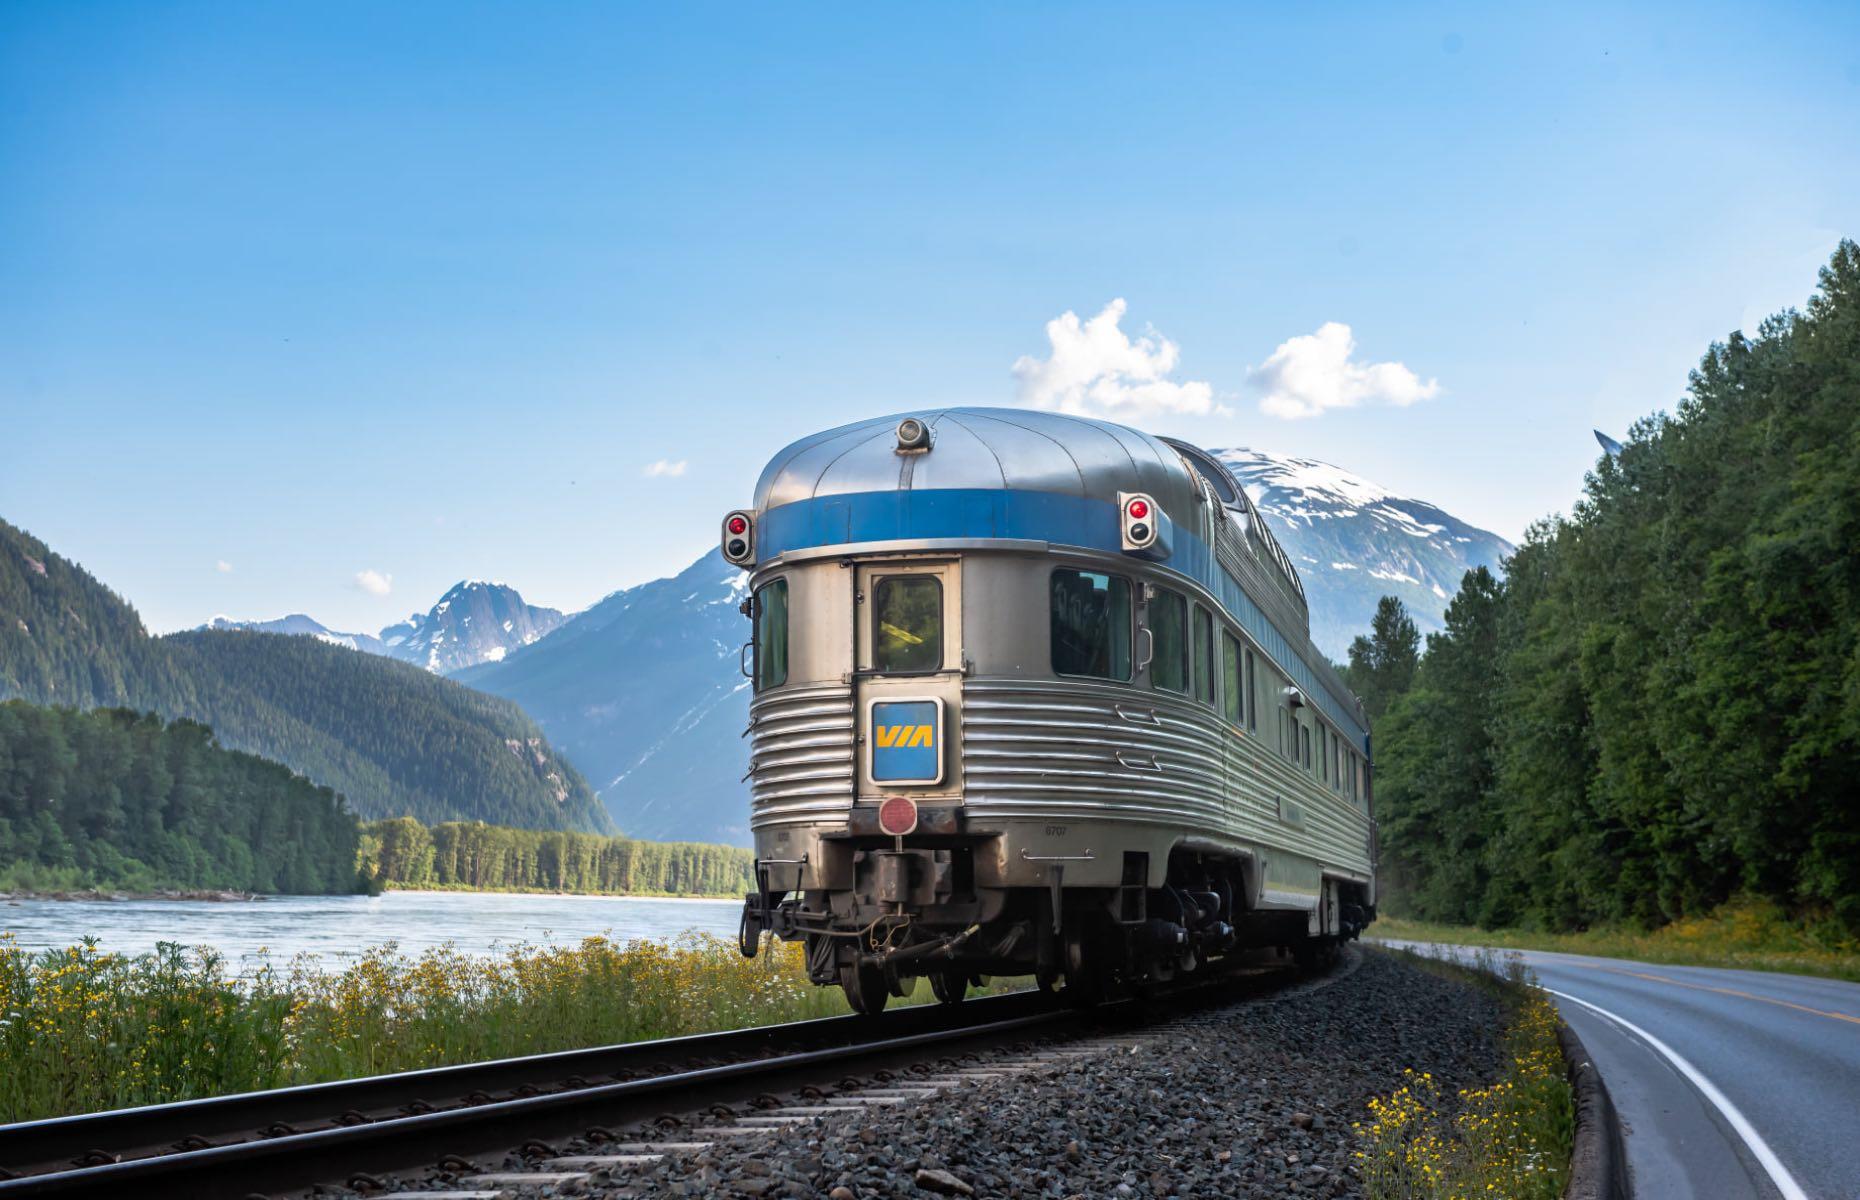 <p>The Canadian National Railways dates back to the early 19th century and VIA Rail’s exclusive sleeper train, known simply as ‘<a href="https://www.viarail.ca/en/explore-our-destinations/trains/rockies-and-pacific/toronto-vancouver-canadian">The Canadian</a>’, journeys across the entire width of Canada from Vancouver to Toronto. With popular trips ranging from six to 19 days, guests get to witness some incredibly diverse landscapes, including the Vancouver coastline, vast prairies and the majestic Rocky Mountains. Highlights across this 2,762-mile (4,446km) long trip include the dramatic scenery between Jasper and Kamloops, where the train clings to the steep mountainside.</p>